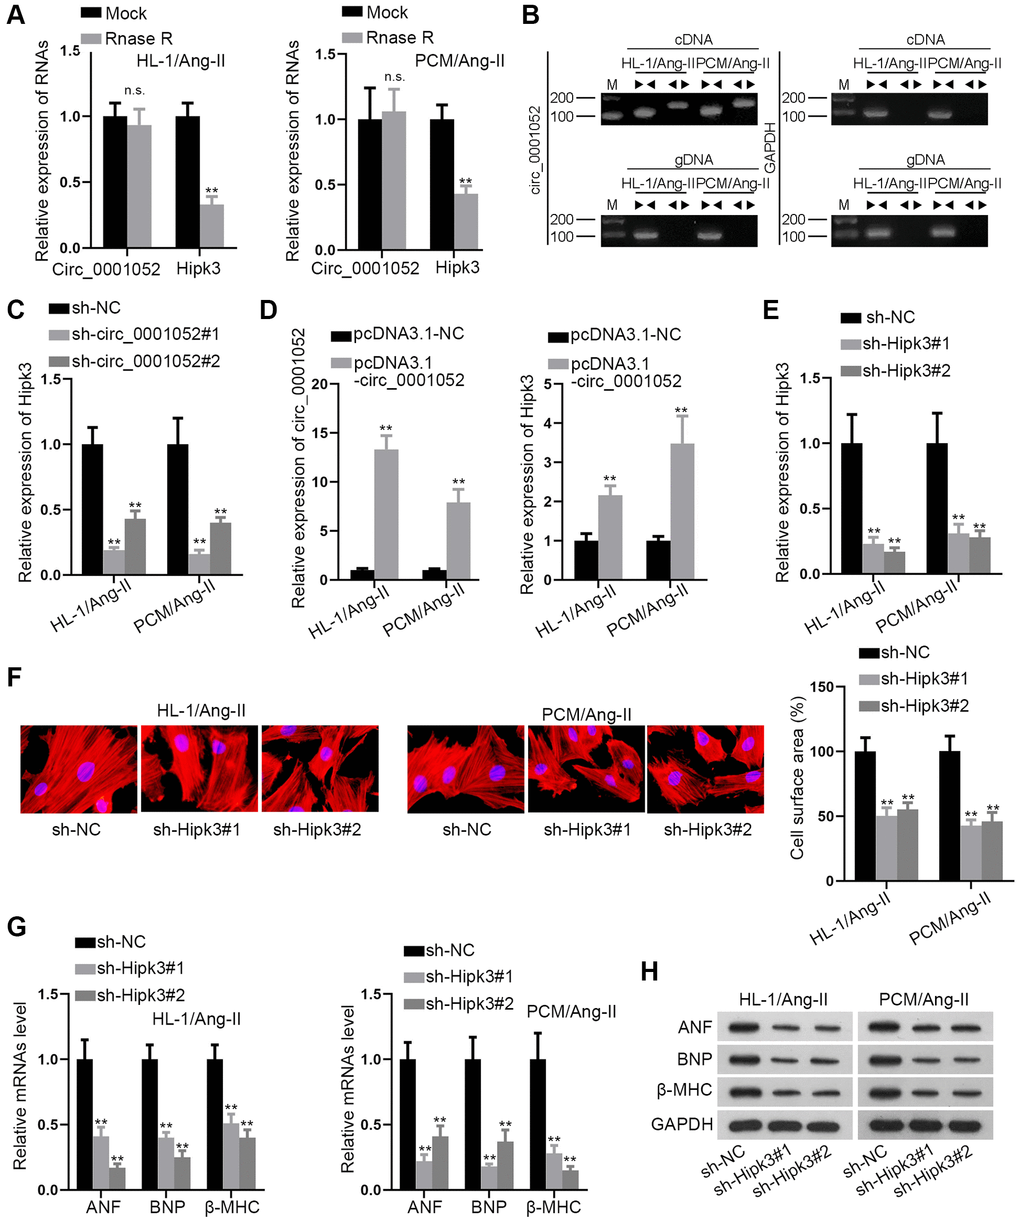 Hipk3 was positively regulated by circ